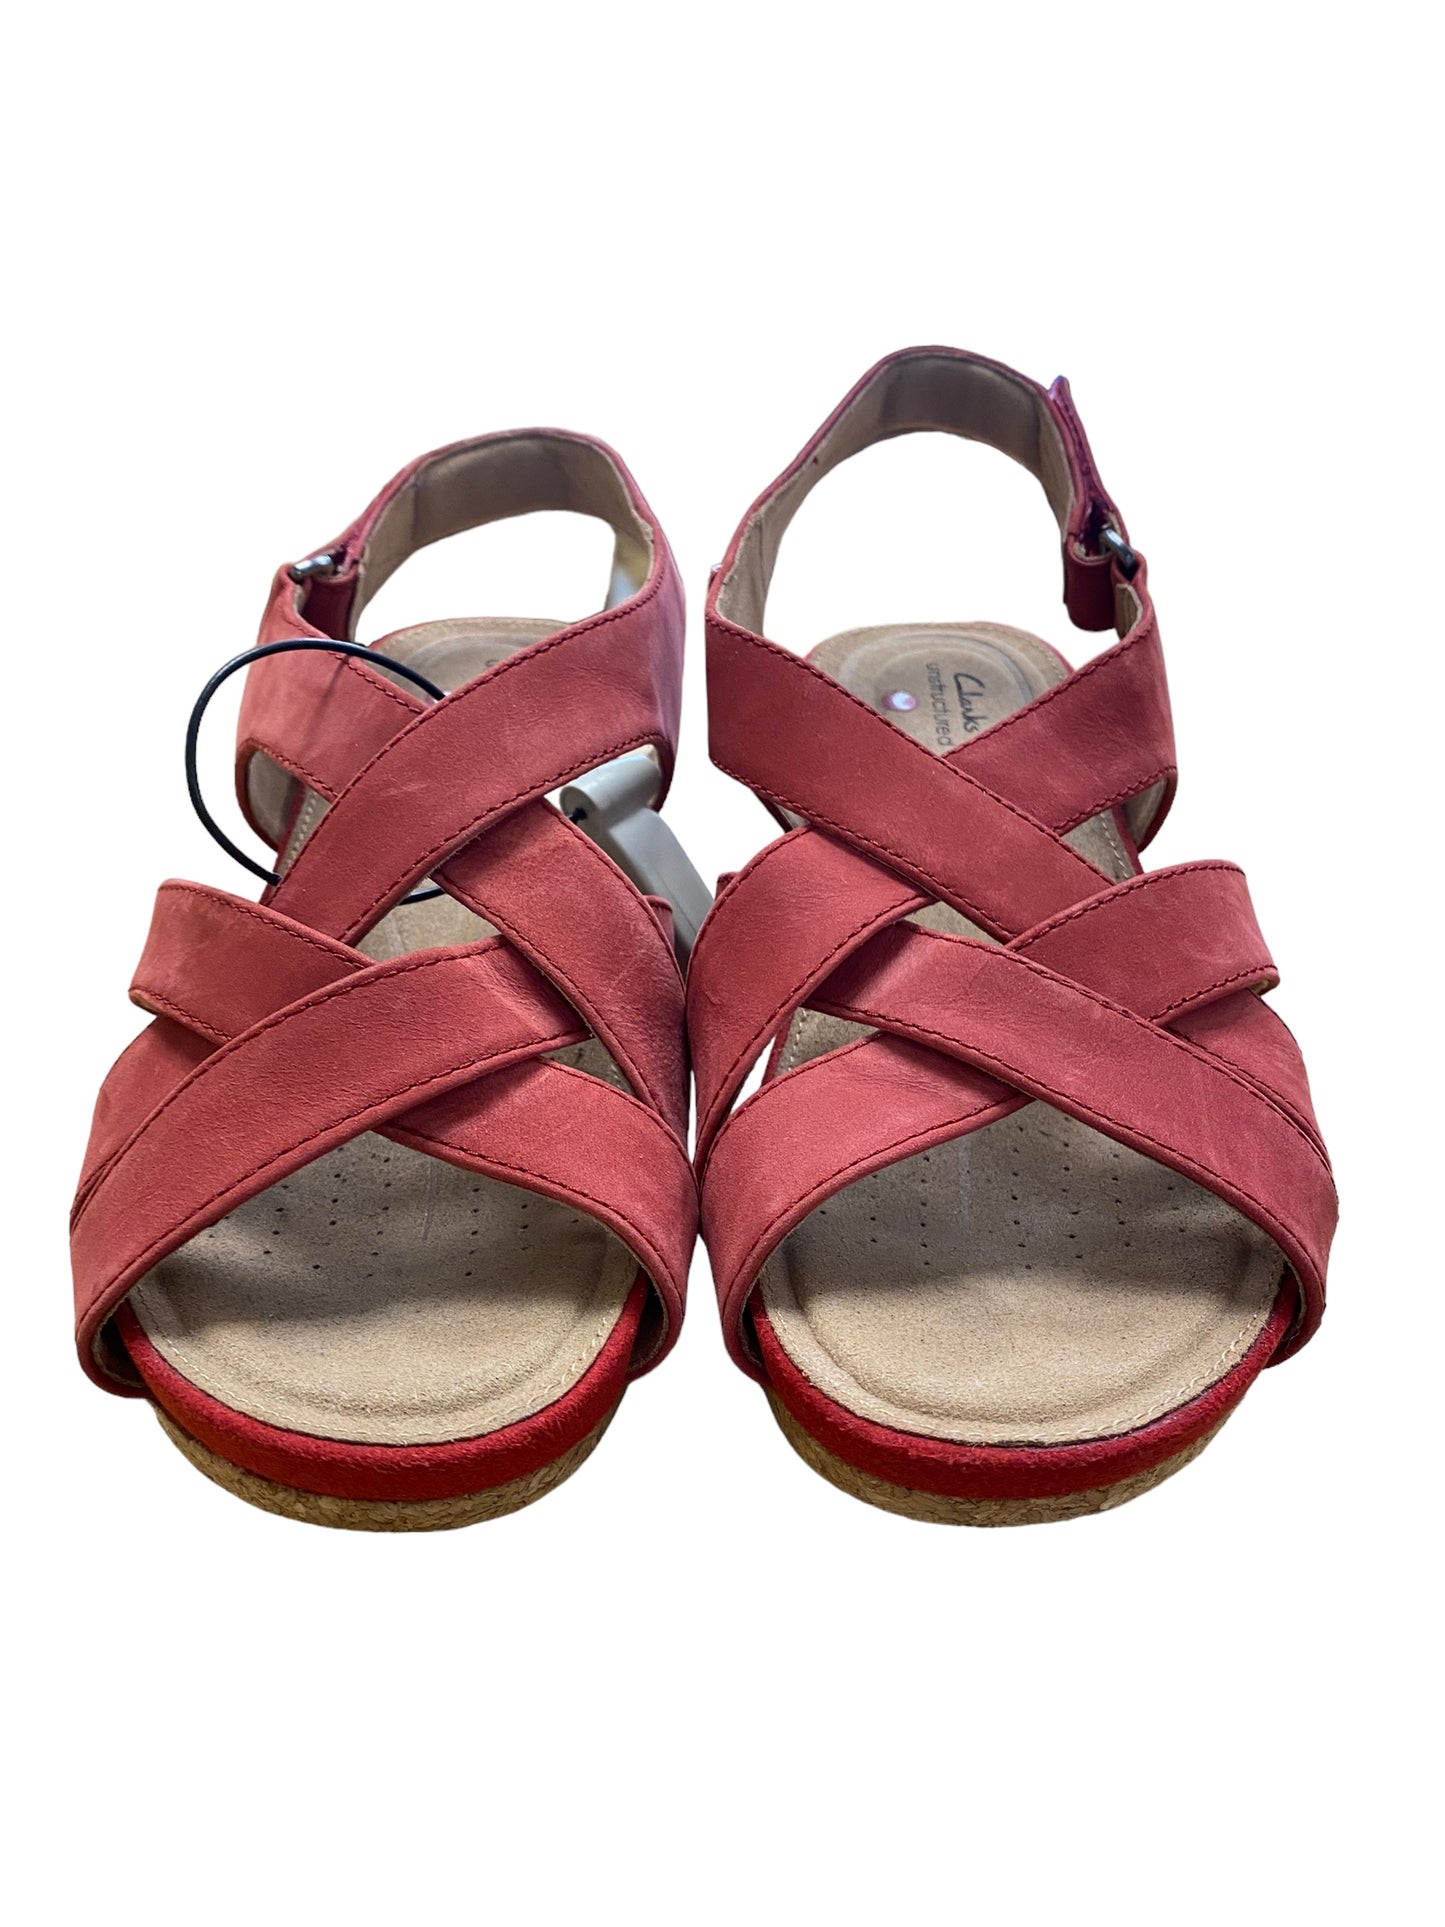 Sandals Heels Wedge By Clarks  Size: 7